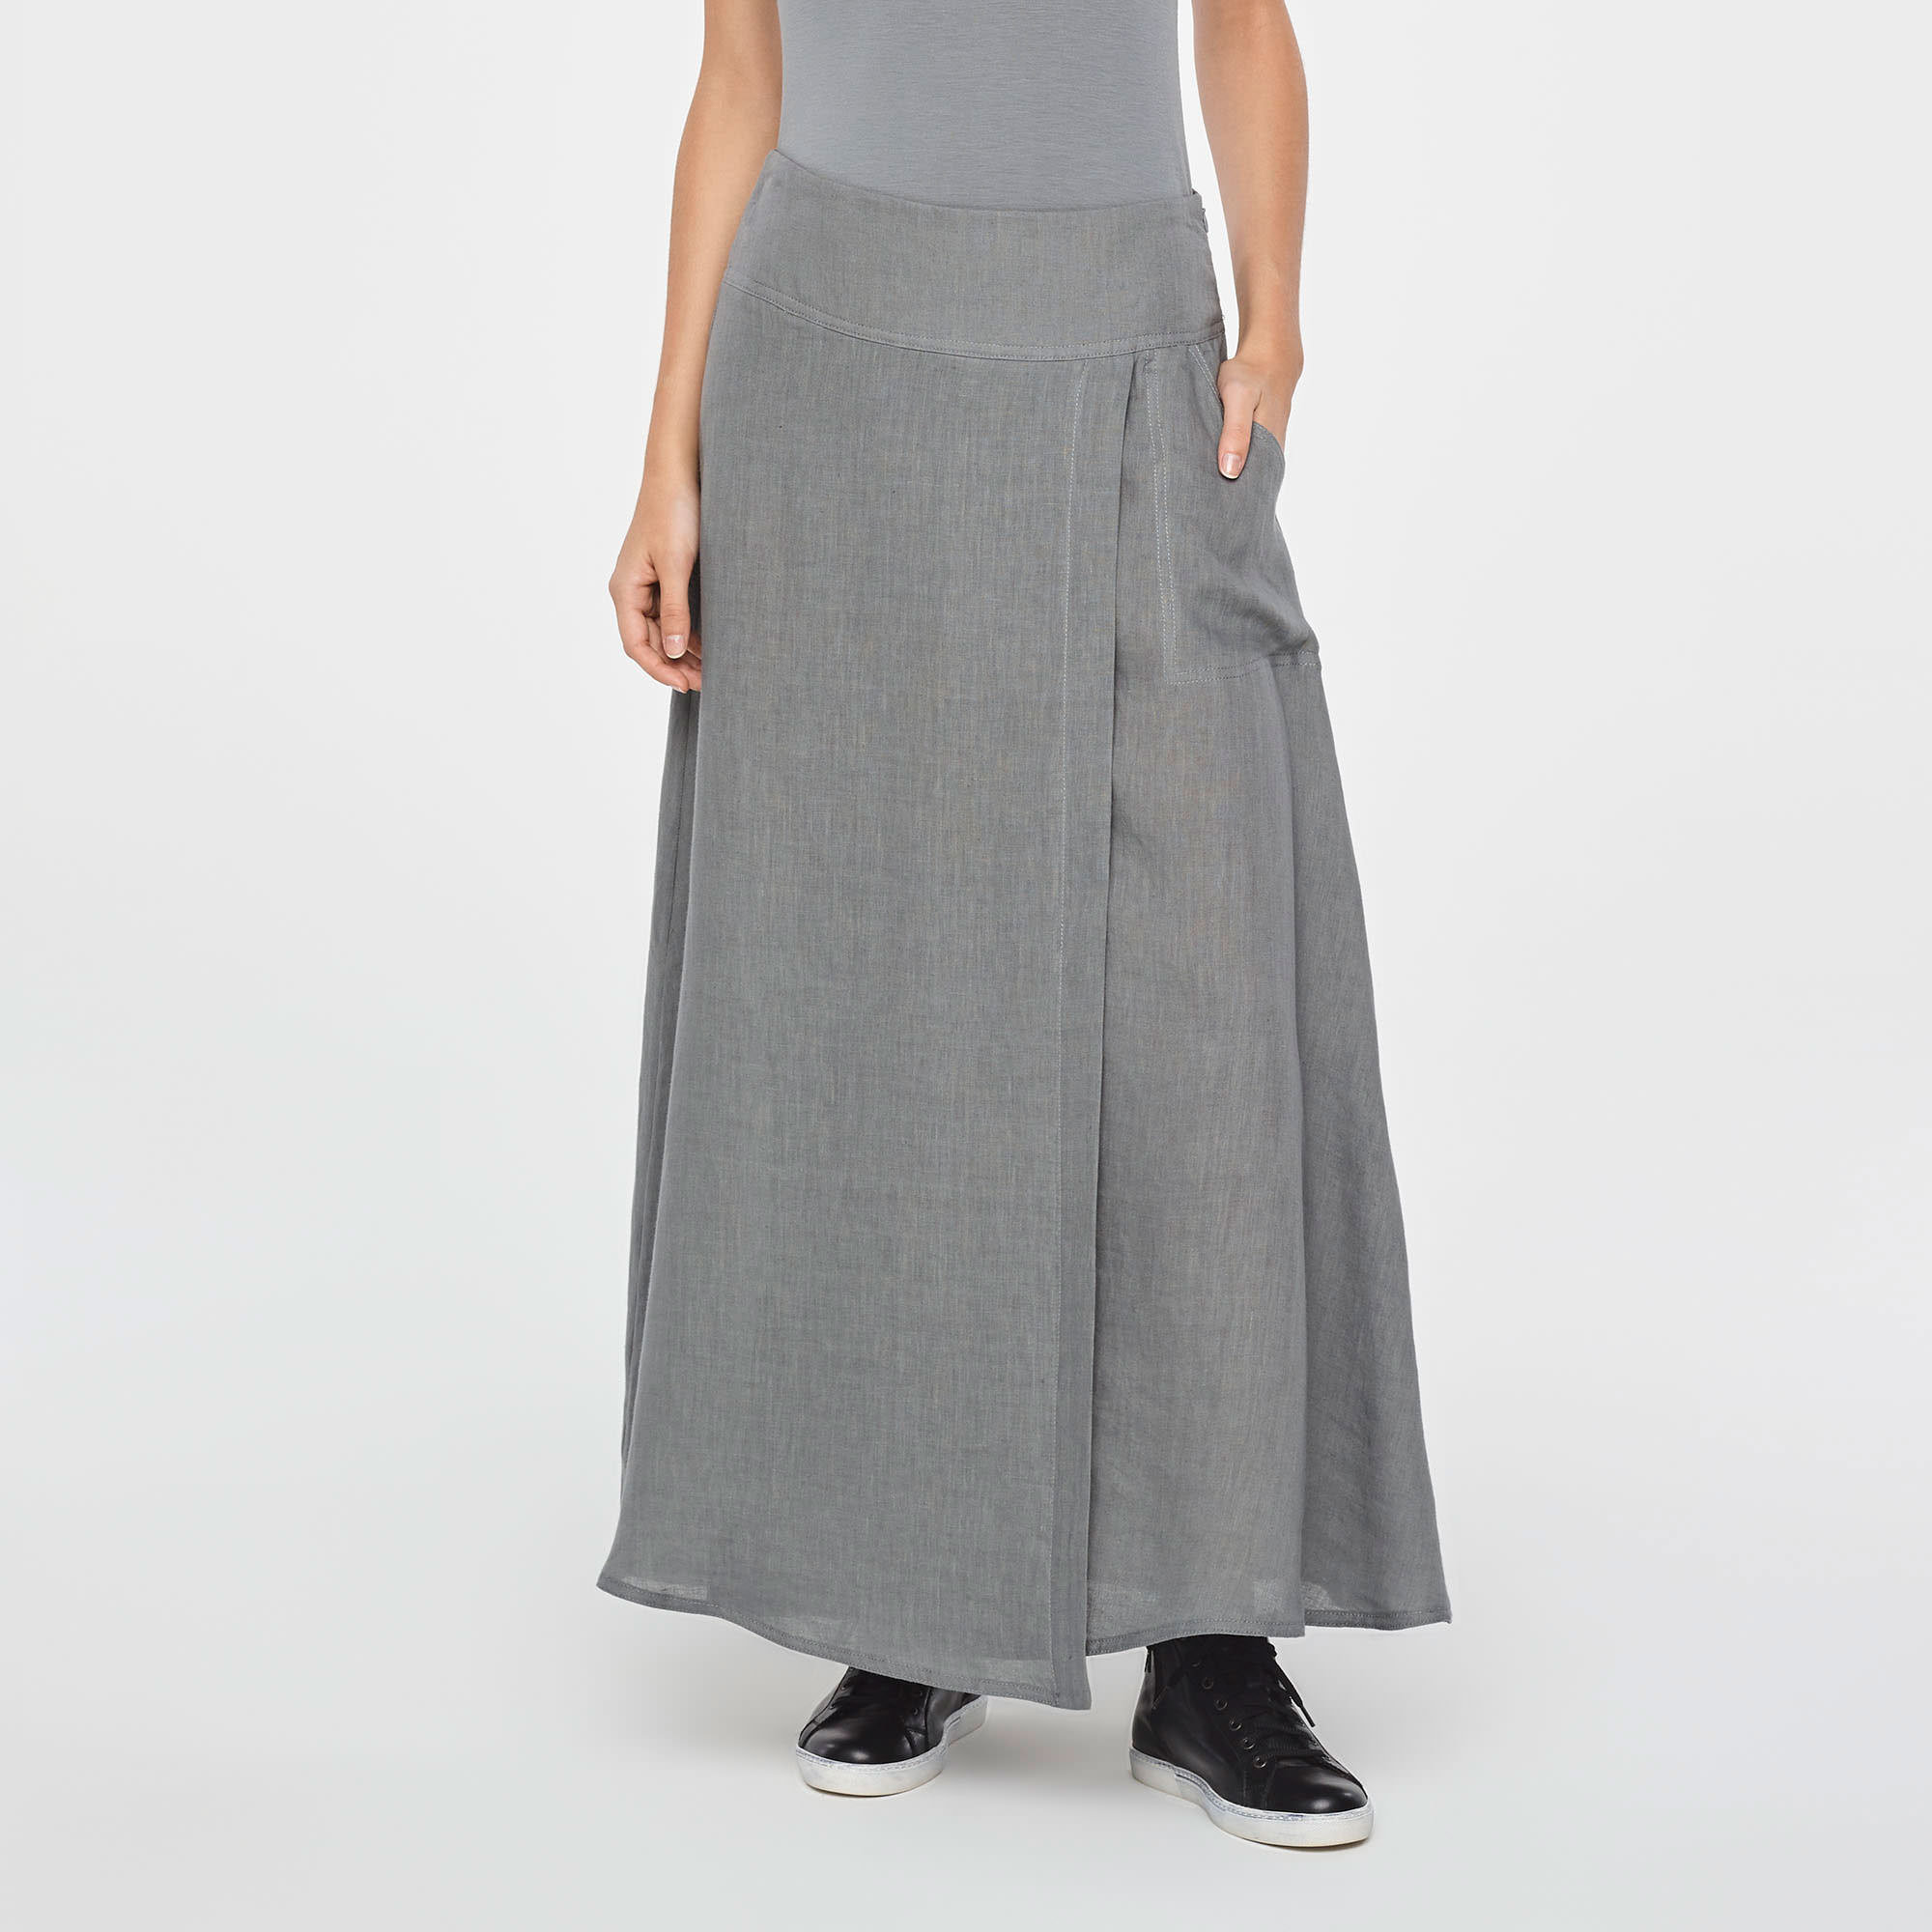 Maxi skirt SARAH PACINI Anthracite size 38 FR in Cotton - 31878594